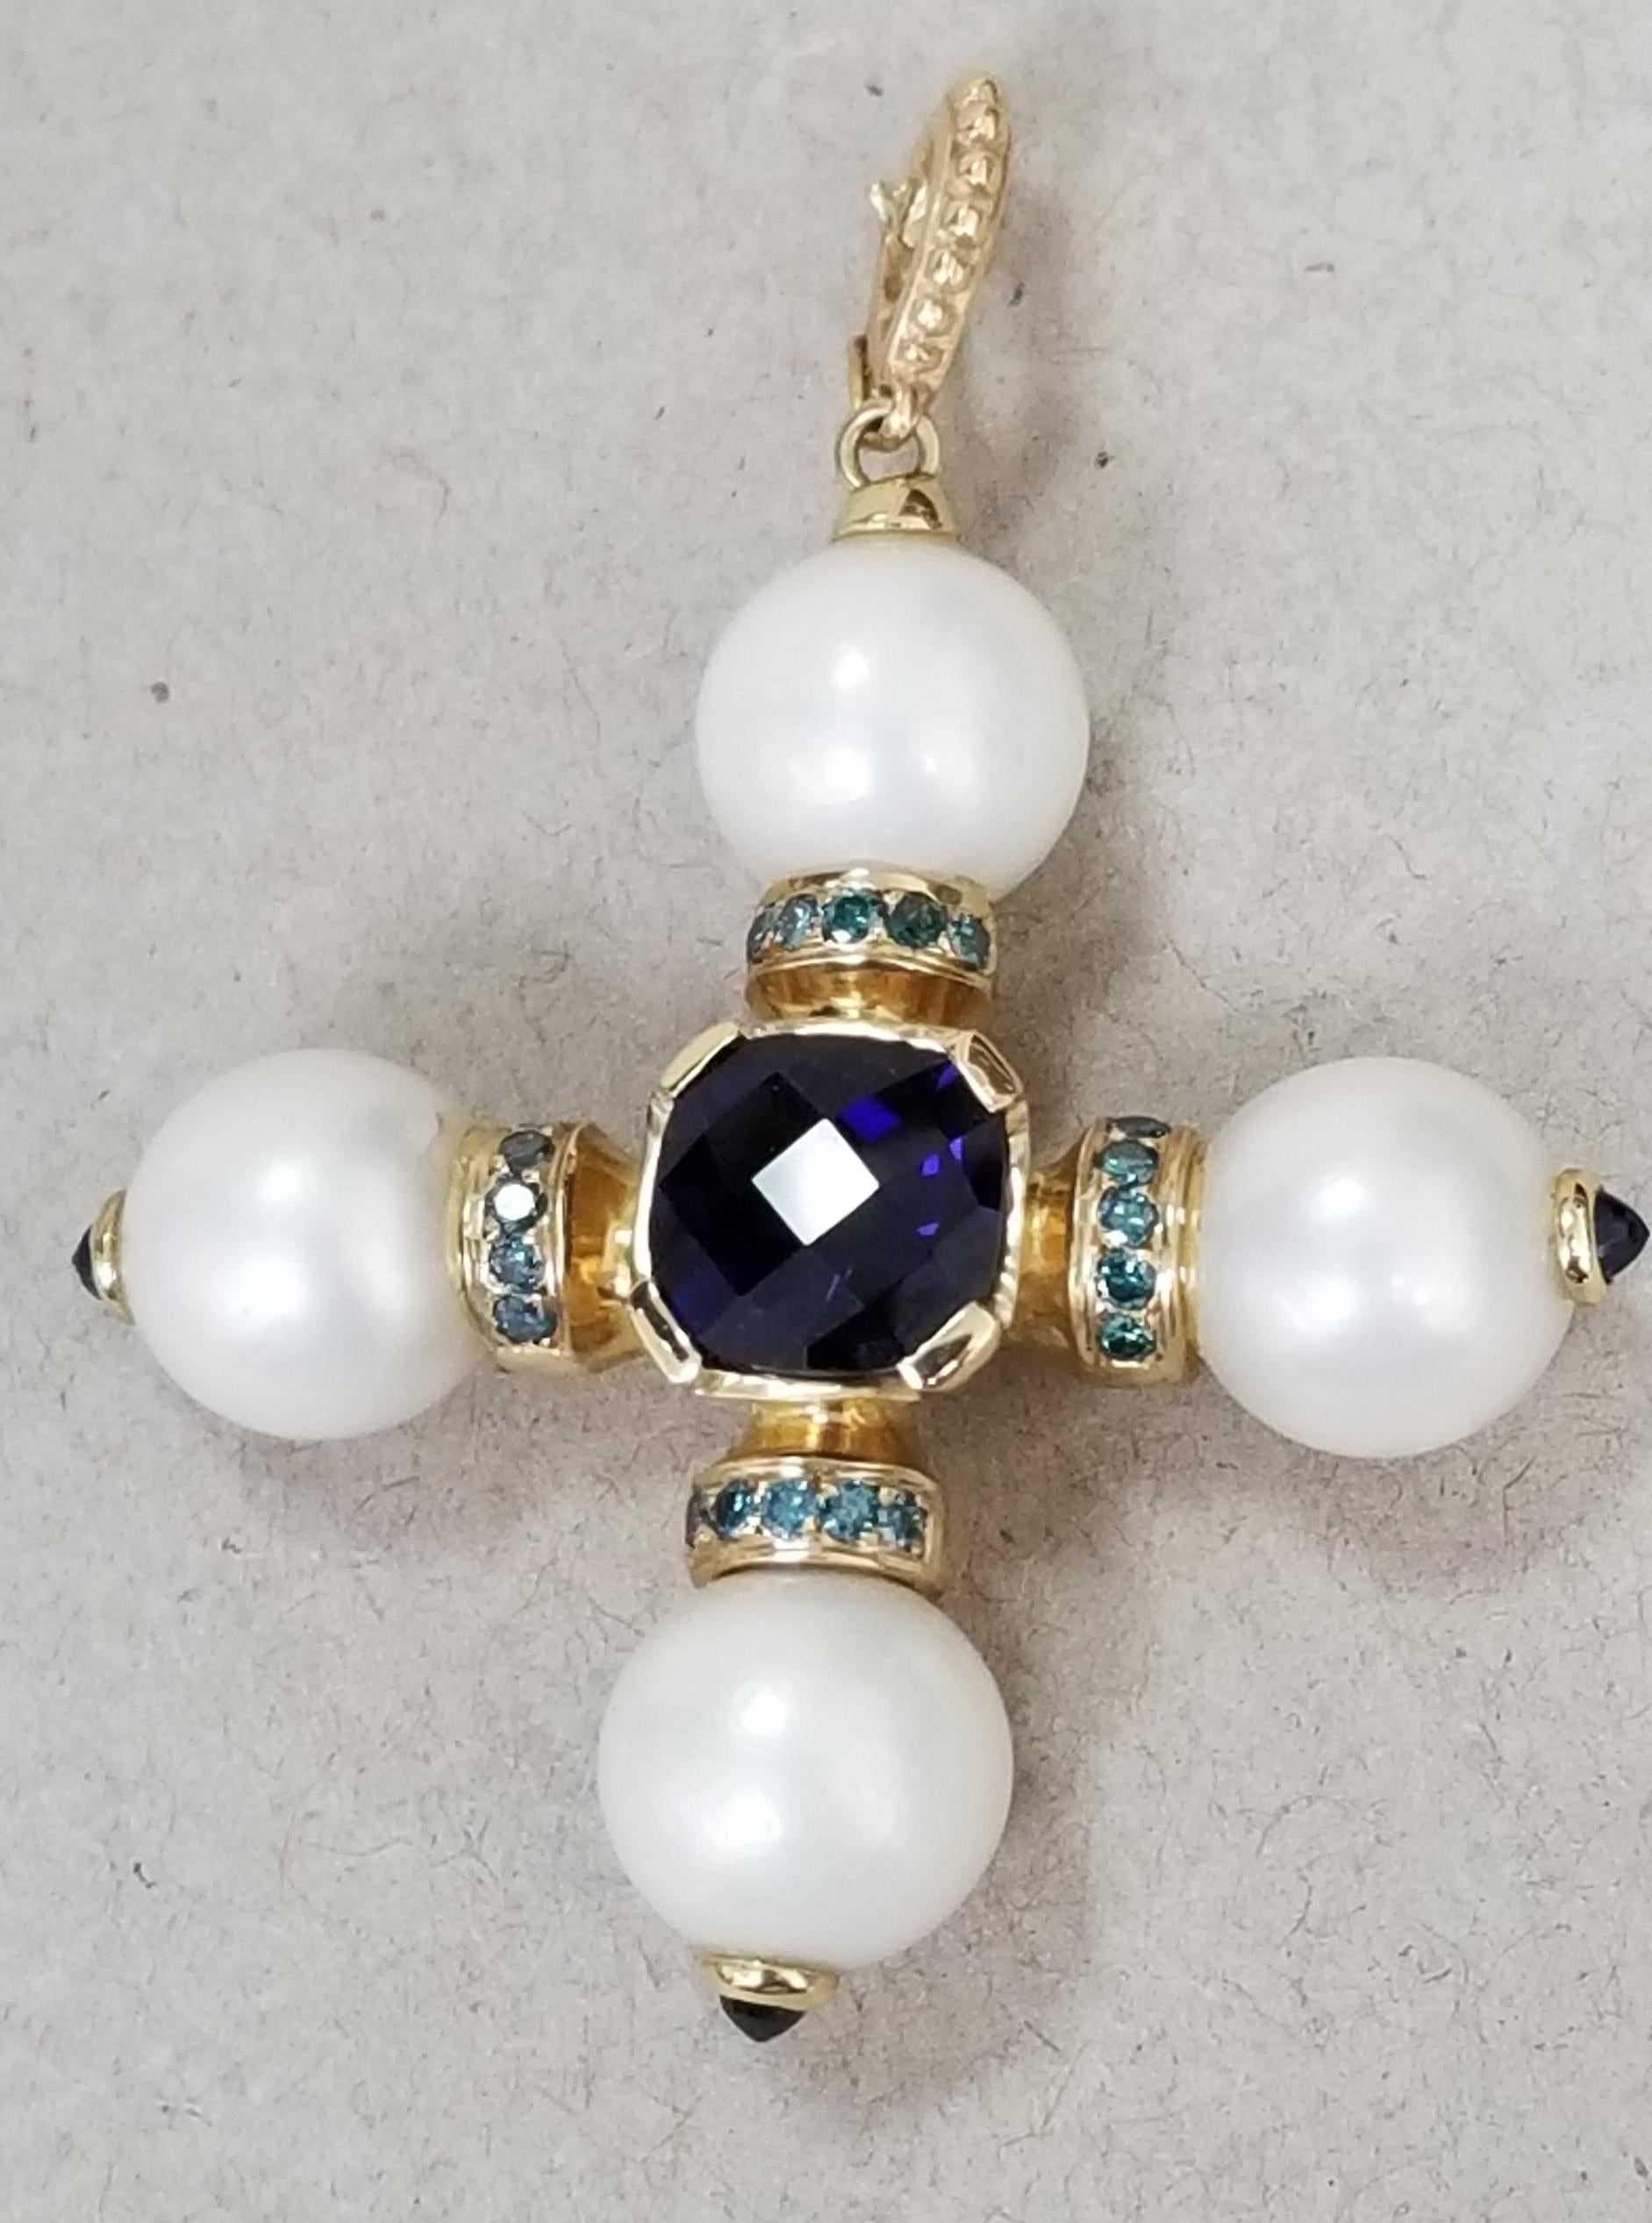 14k yellow gold South Sea Pearl cross with 4 pearls measuring 11-11.5mm, with a cushion cut iolite weighing 3.67cts. and 20 round full cut 